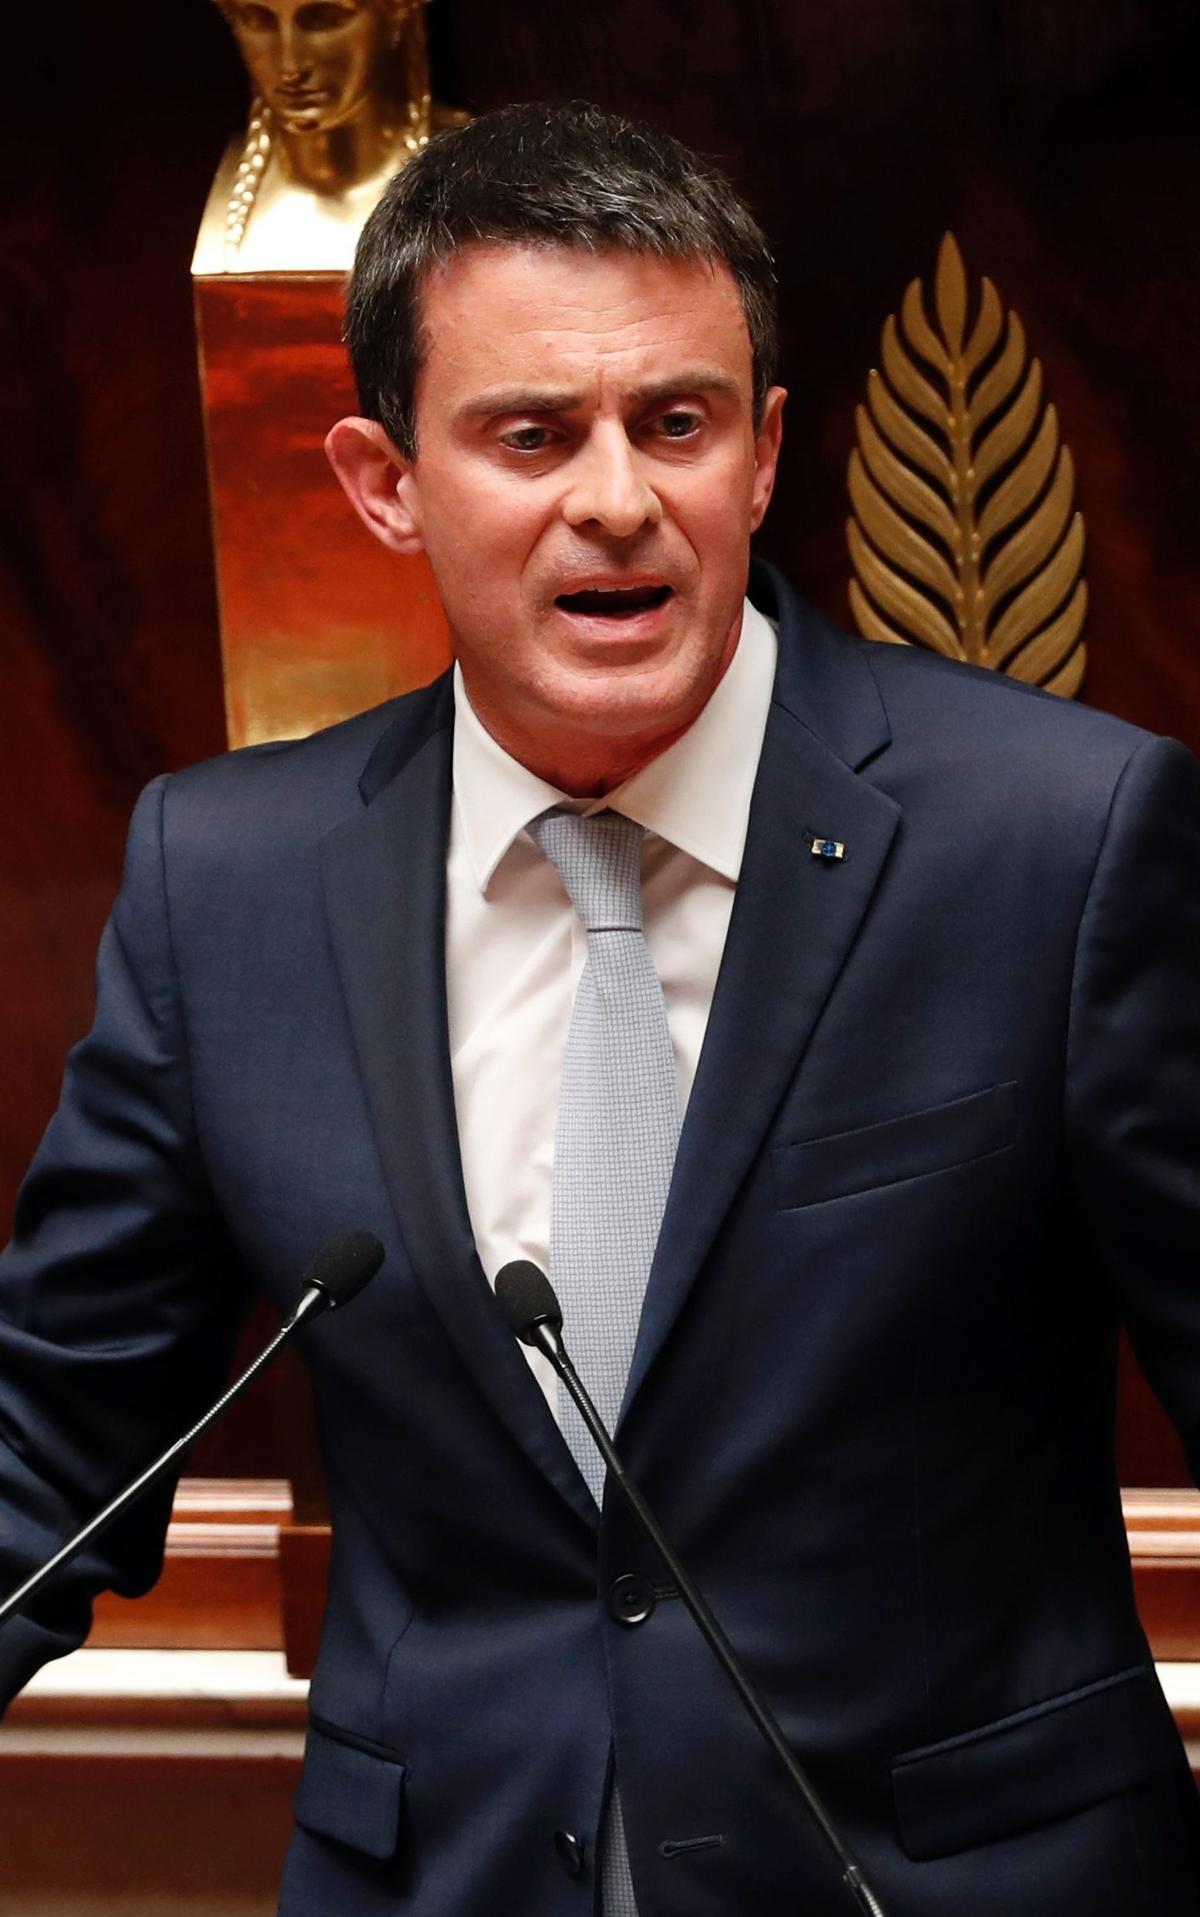 Manuel Valls at the French National Assembly in Paris on July 19, 2016. (Francois Guillot/AFP/Getty Images)